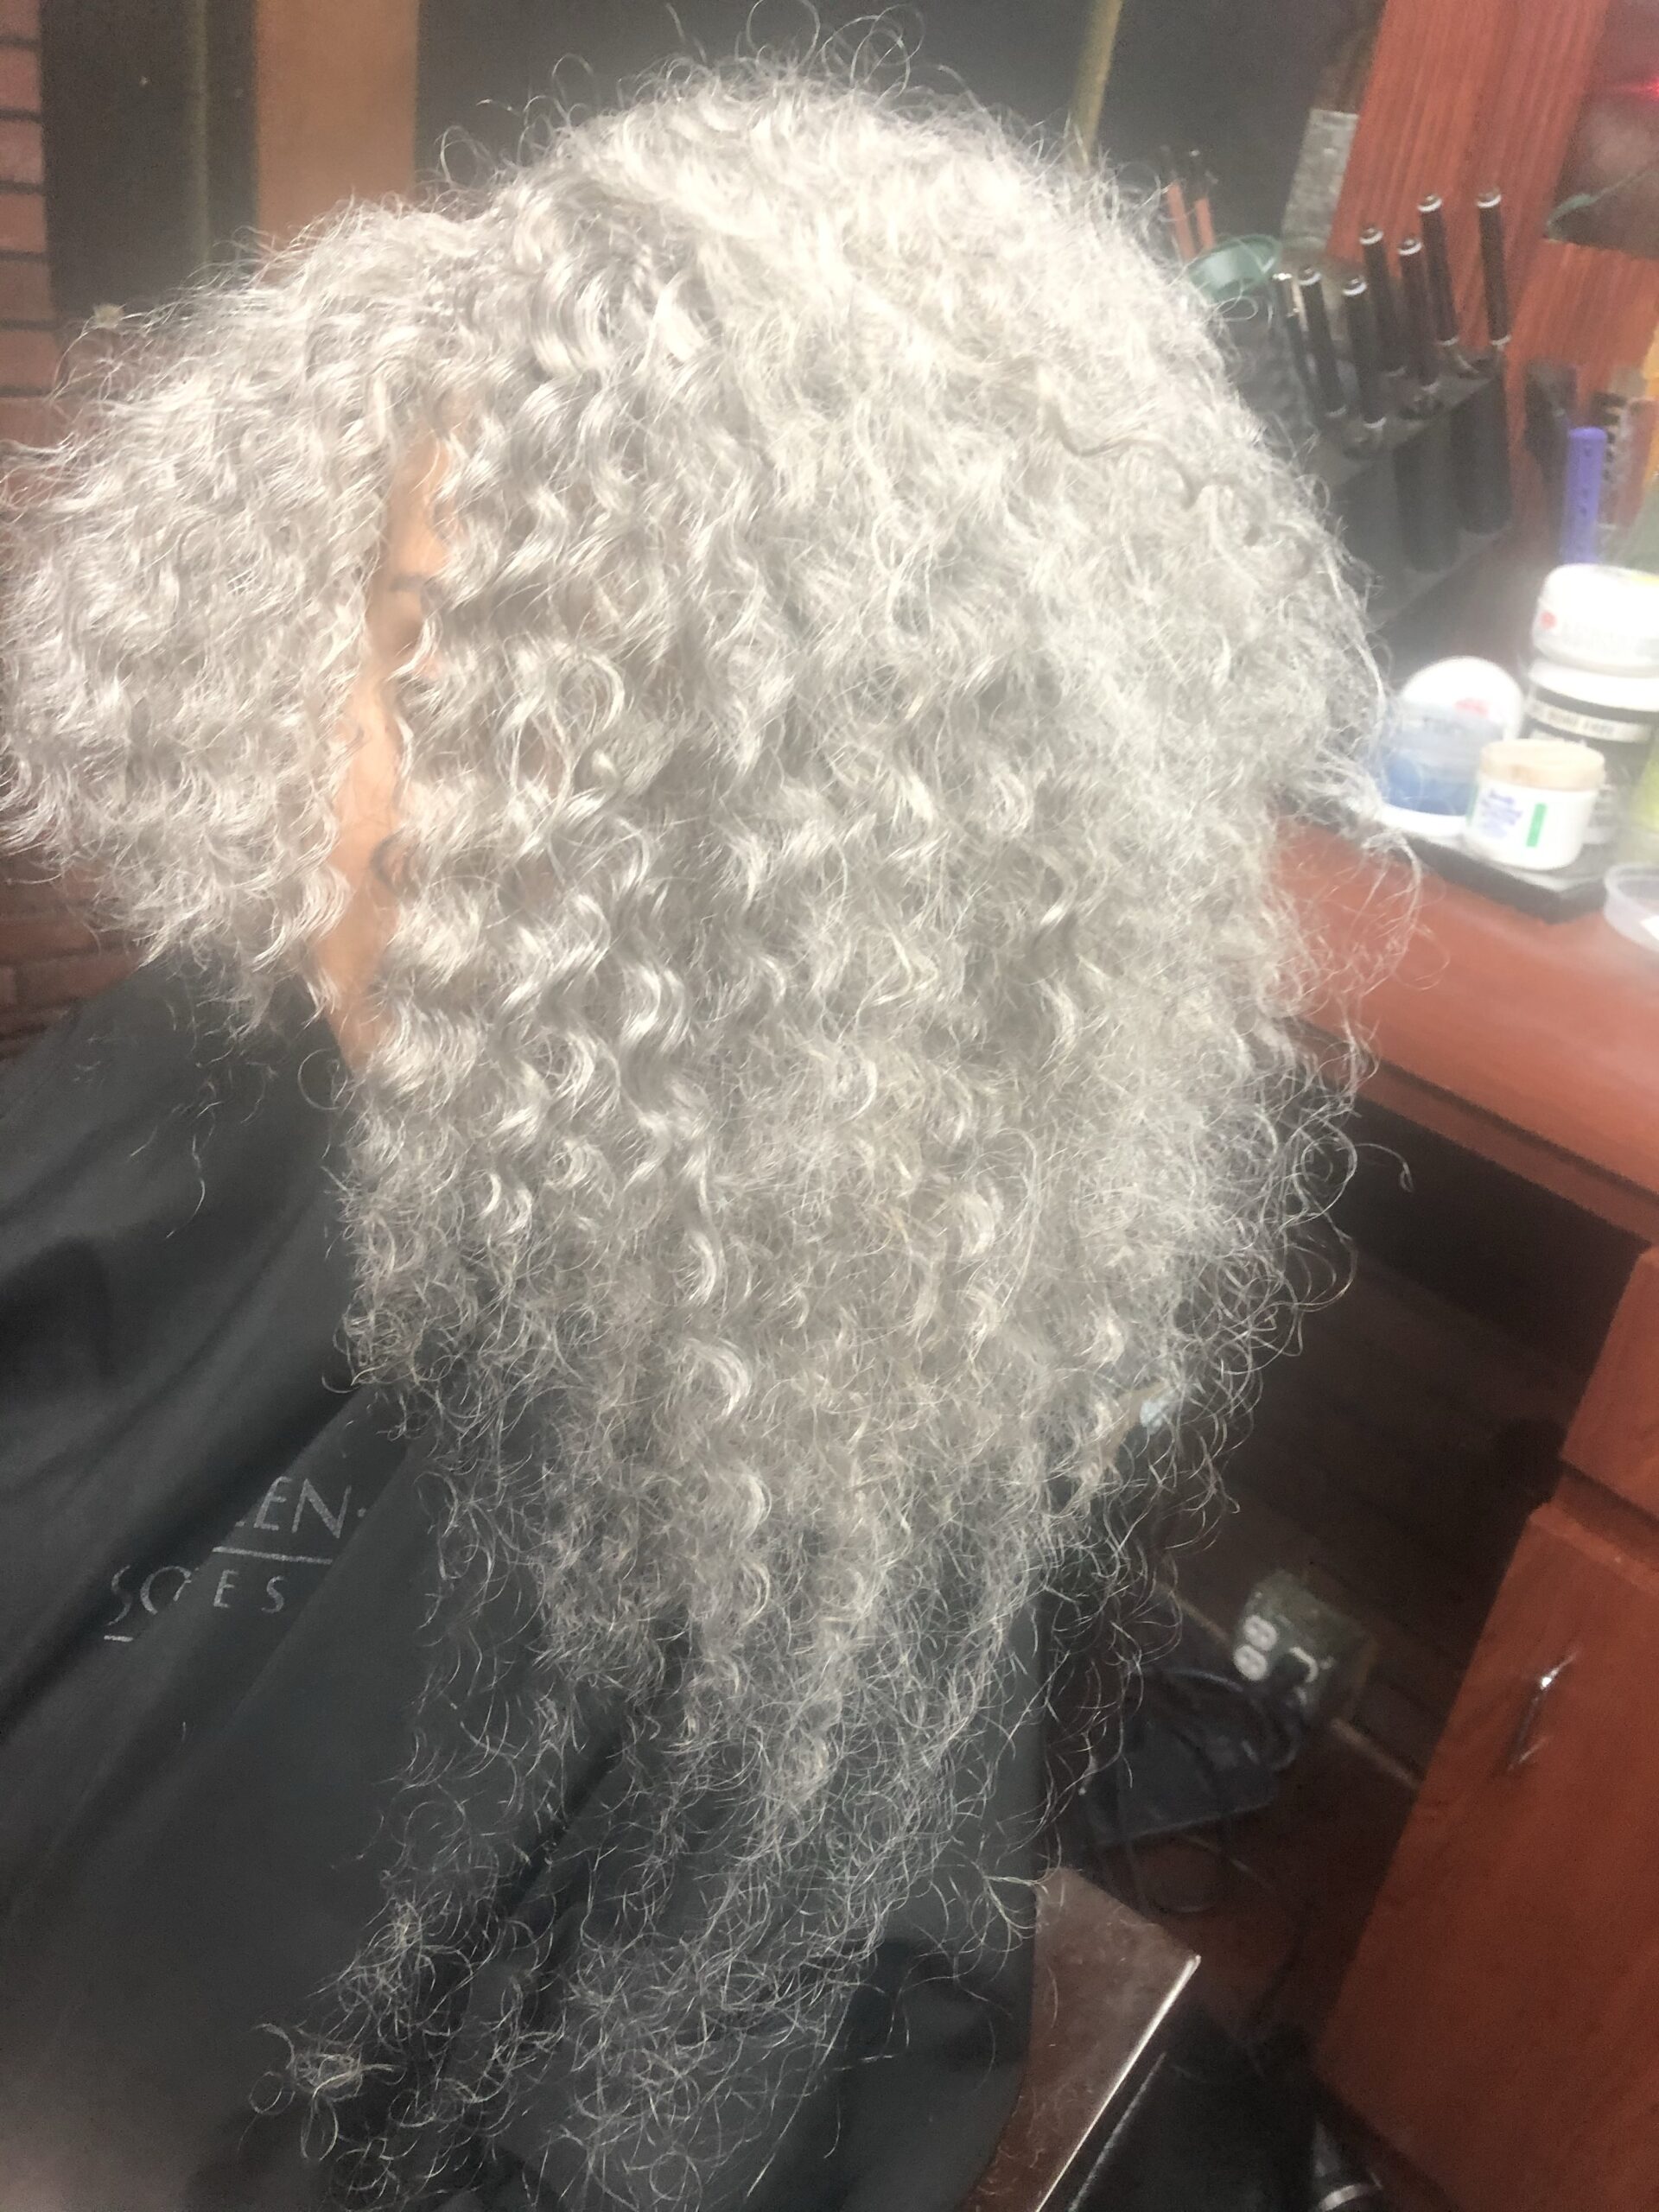 A gray curly hair